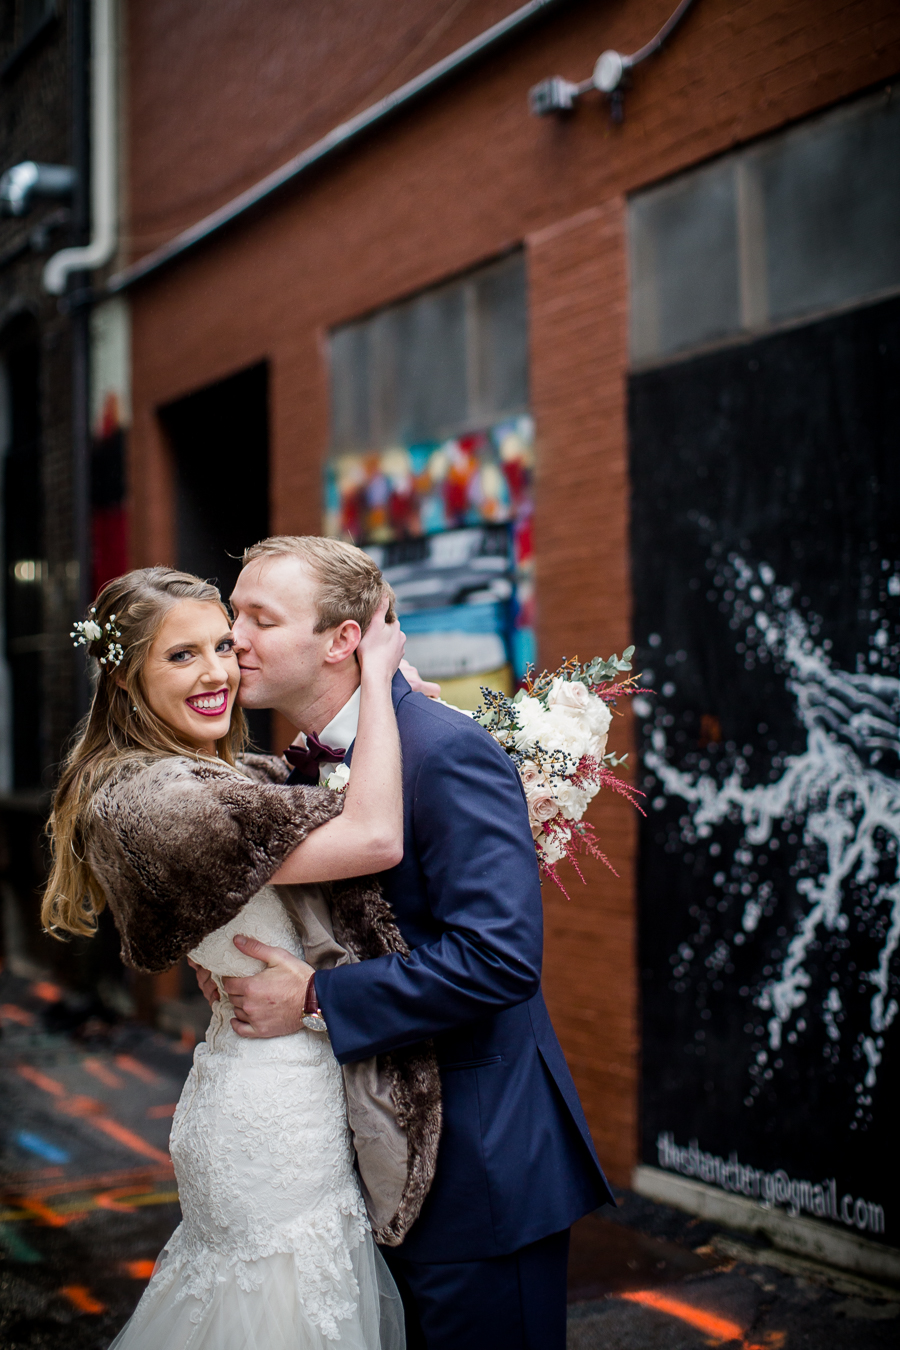 He kisses her cheek in the art alley during the bride and groom romantic portraits at this winter wedding at Knoxville Wedding Venue, Jackson Terminal, by Knoxville Wedding Photographer, Amanda May Photos.